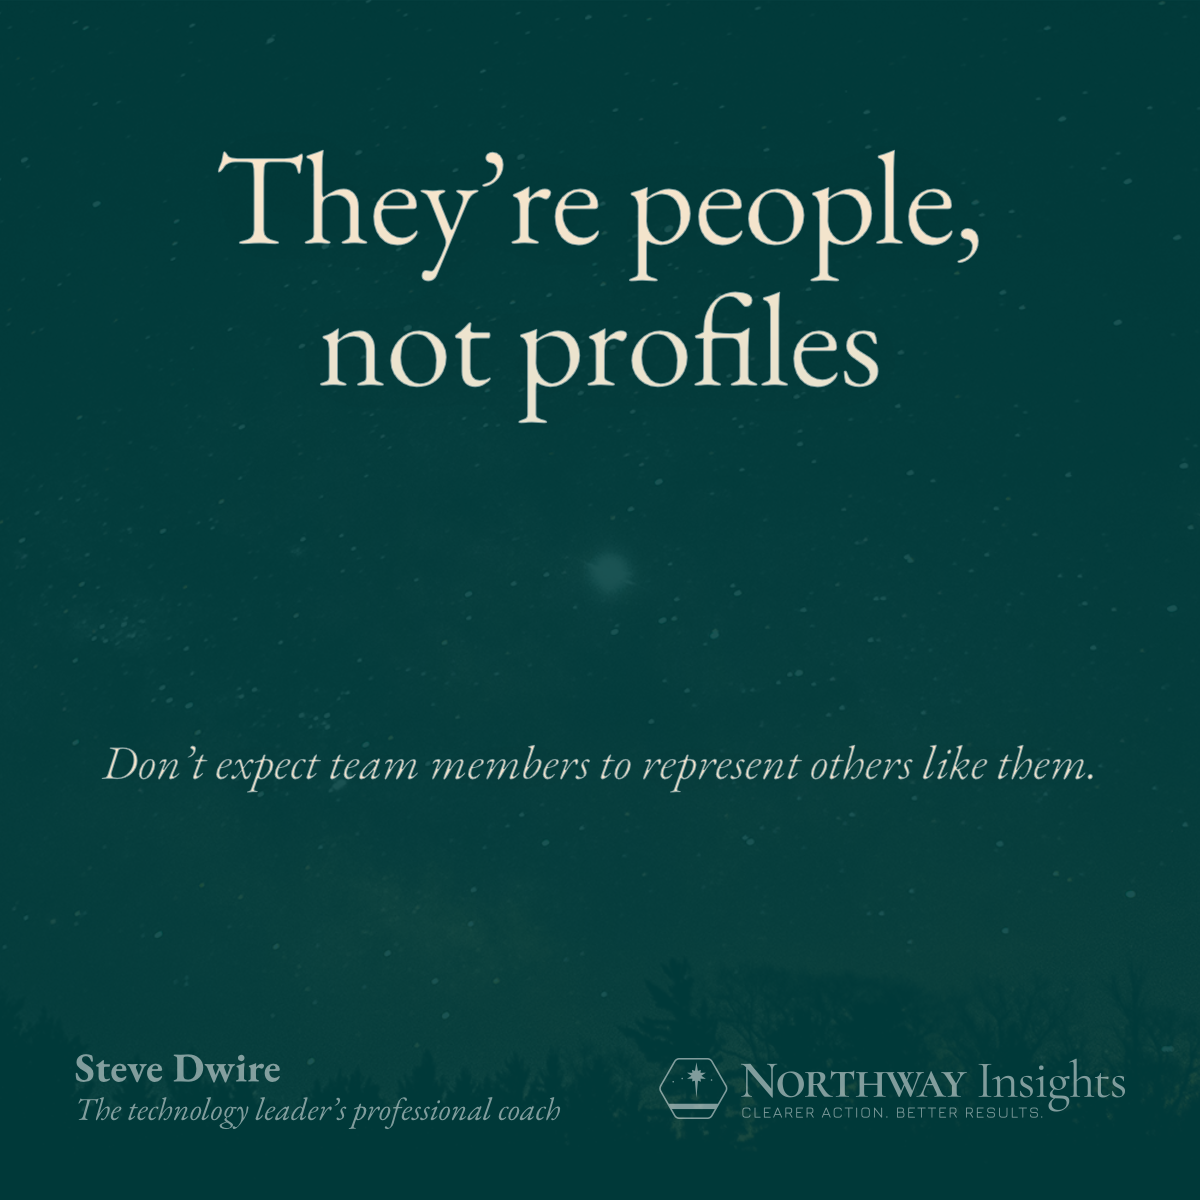 They’re people, not profiles